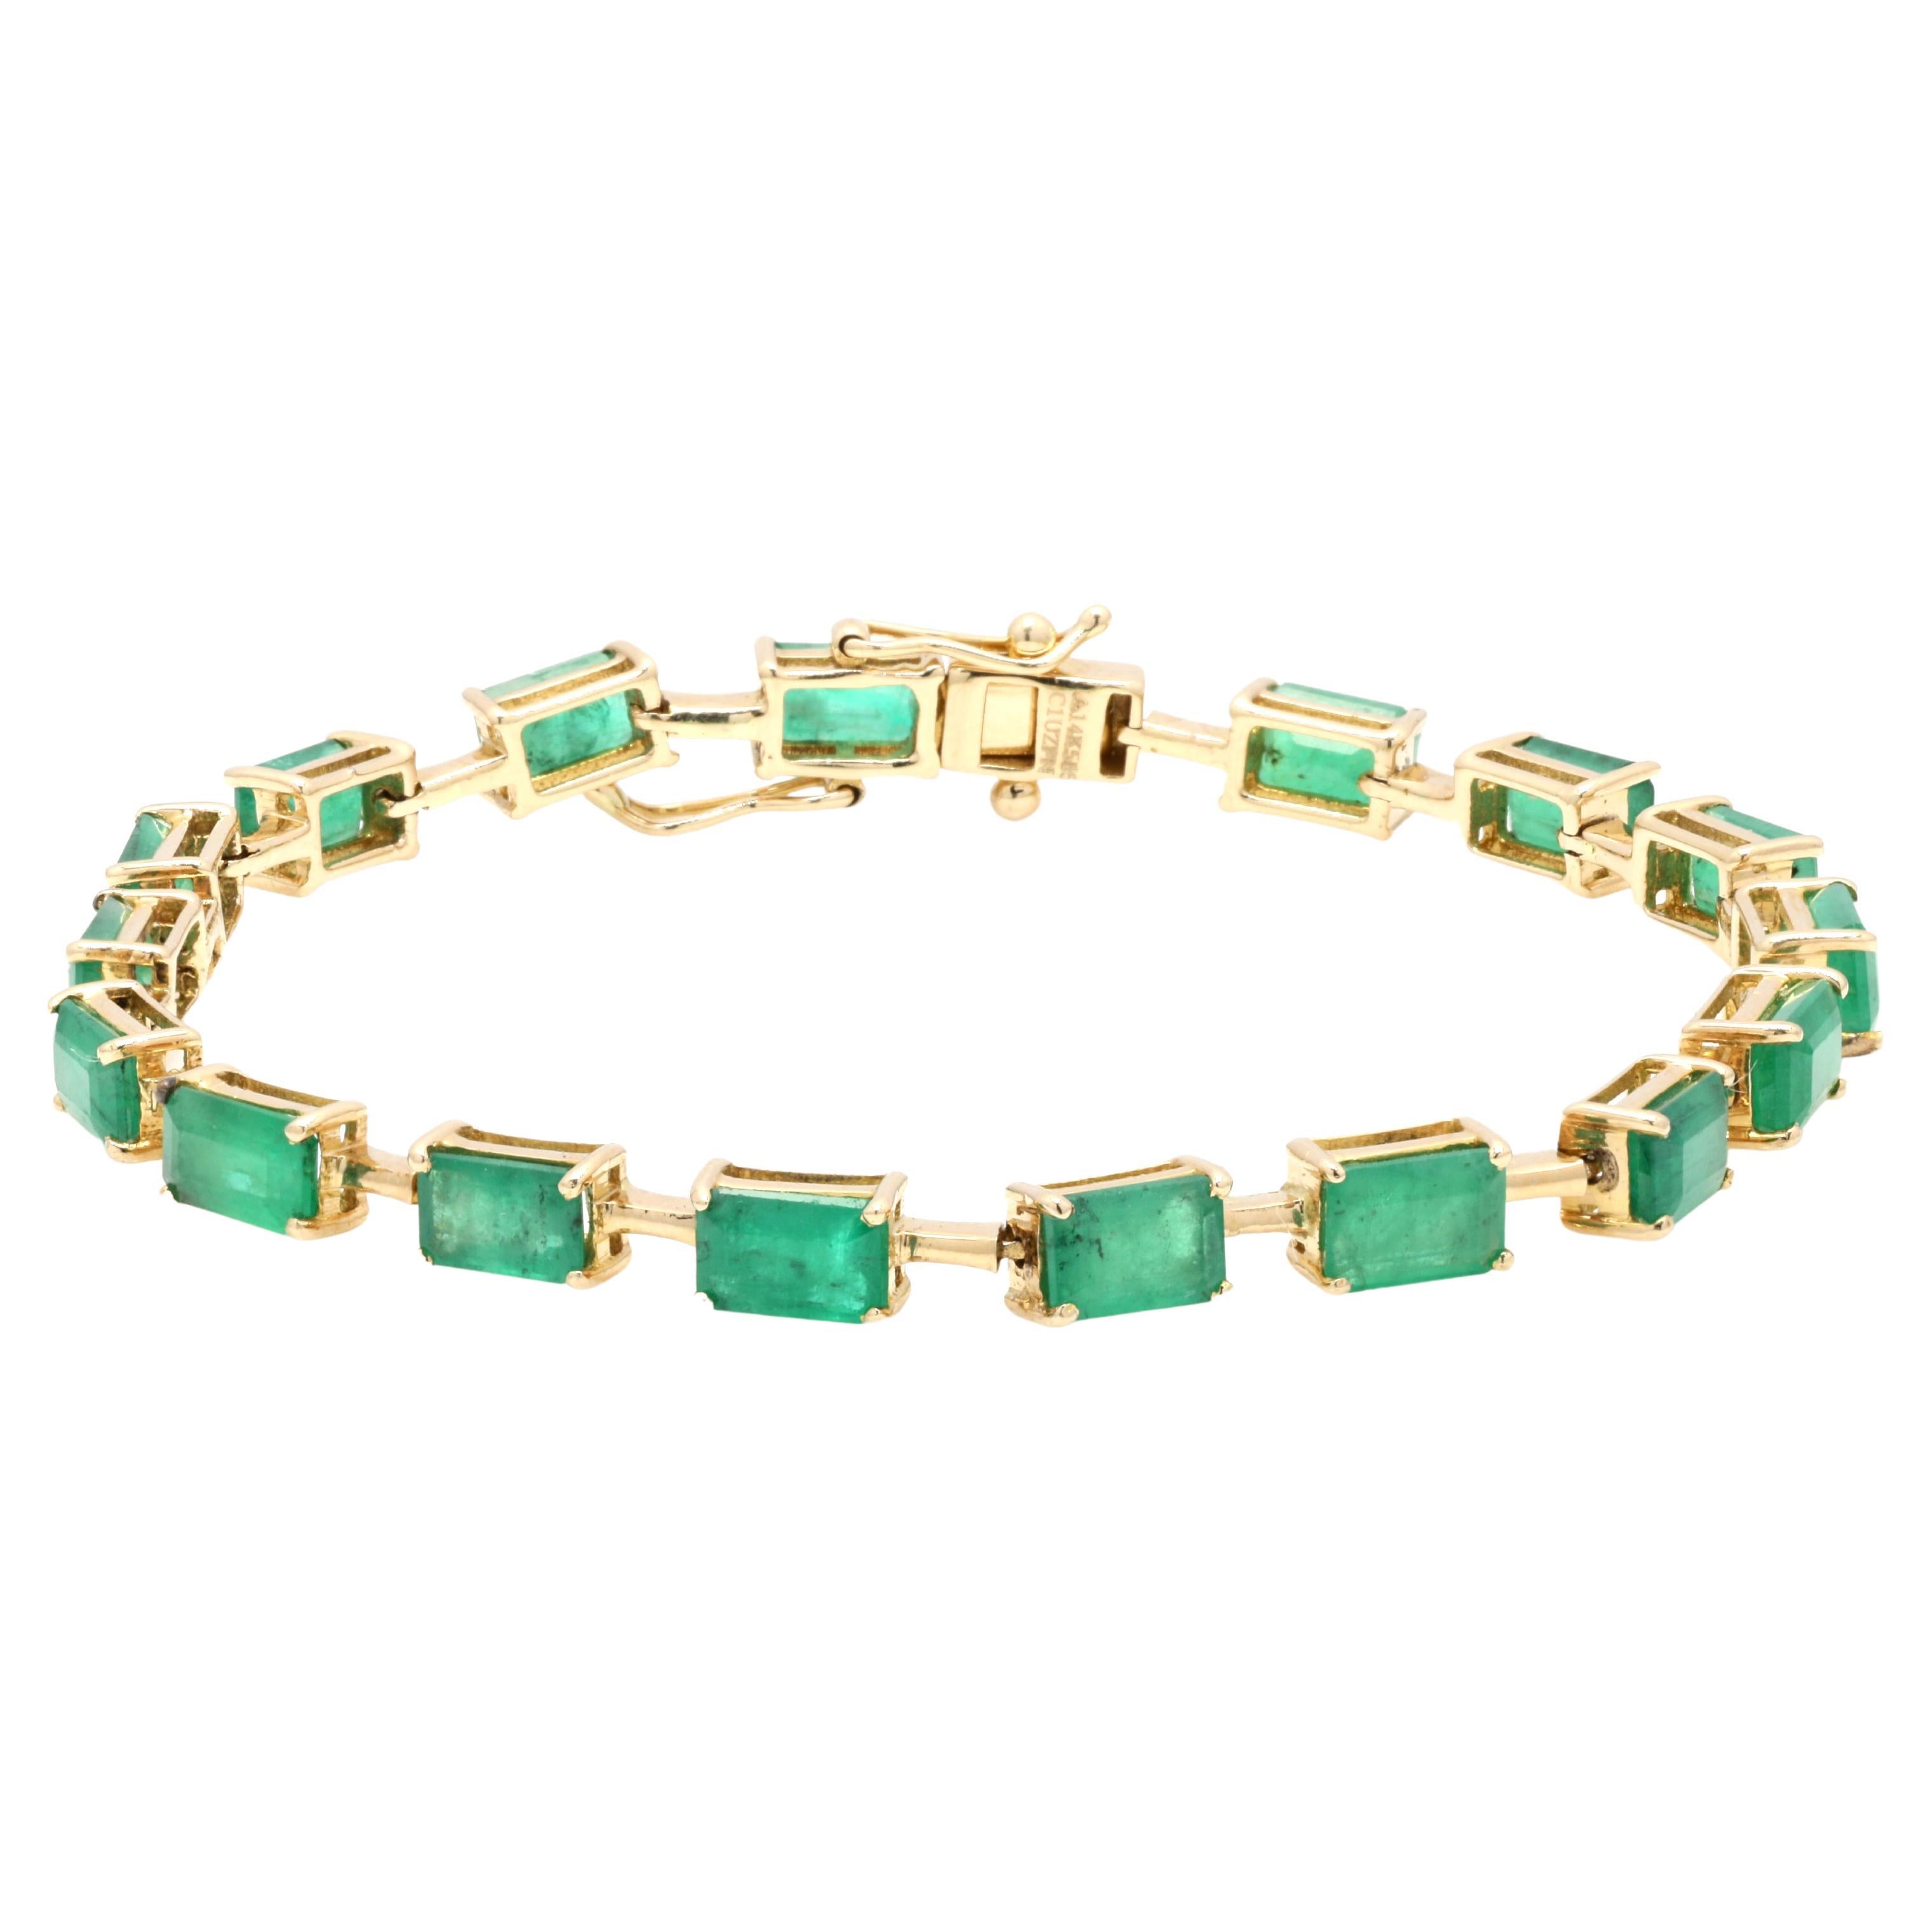 Magnificent Baguette 9 Ct Natural Emerald Tennis Bracelet in 14K Yellow Gold For Sale